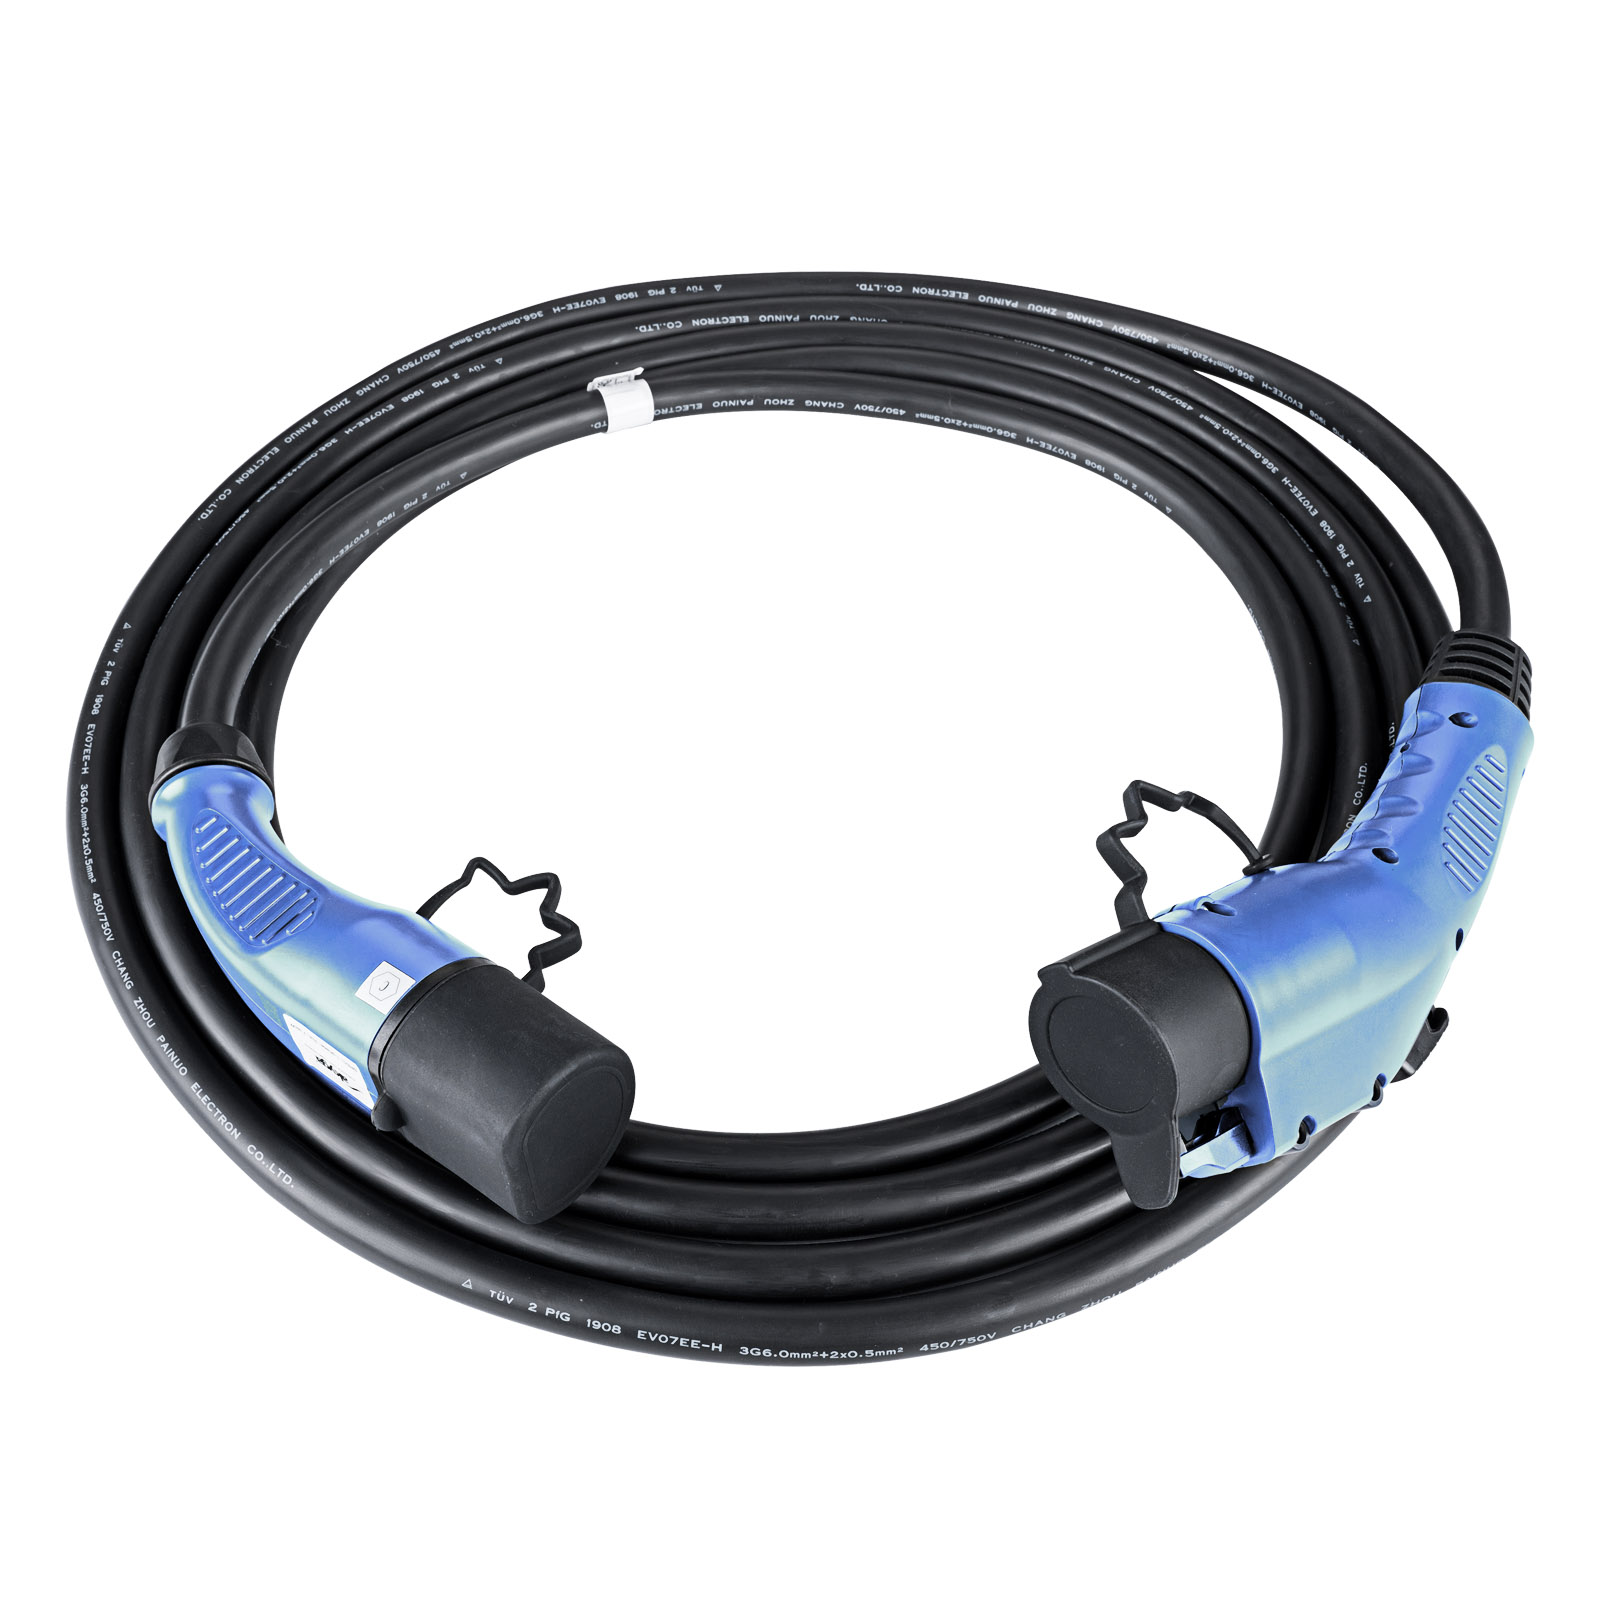 Main image Cable for electric cars AK-EC-08 Type2 / Type1 32A 6m